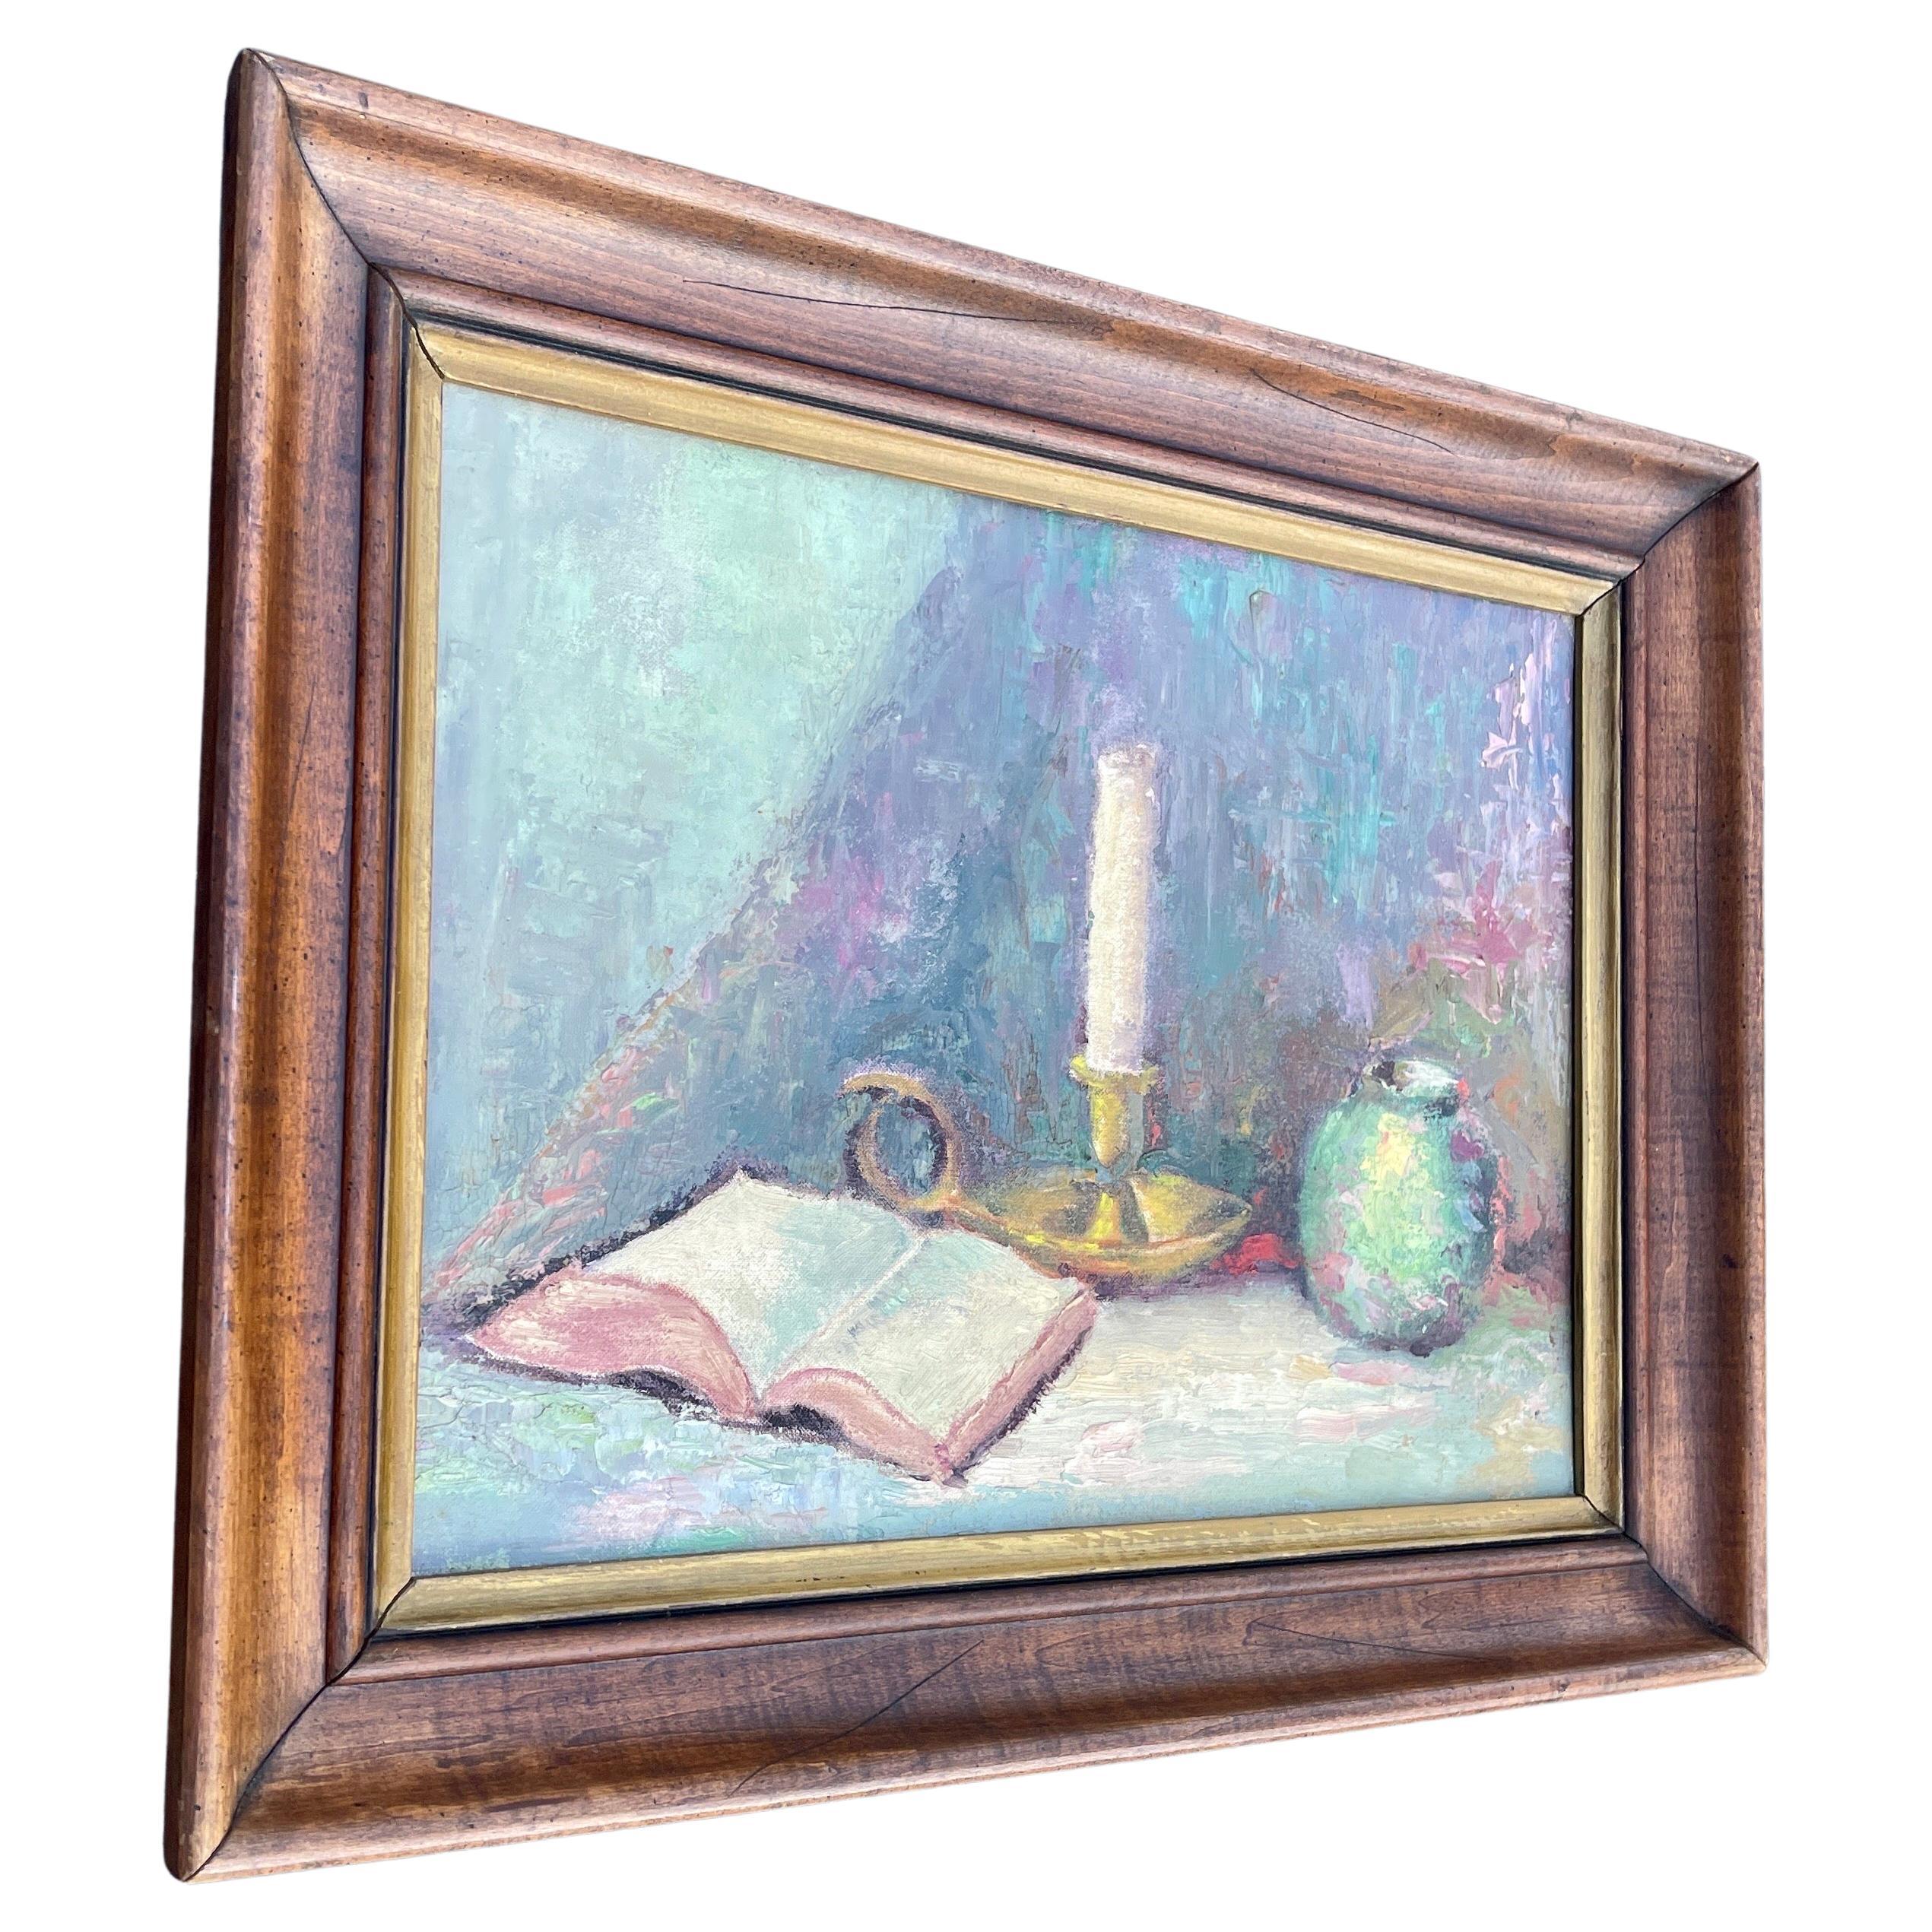 Oil Painting on Board with Book Brass Candlestick and Vase

A very simple, lifelike still-life oil on canvas. This piece has been encased in a solid wood frame with classic gold liner. This Mid 20th Century artwork features warm and soothing colors